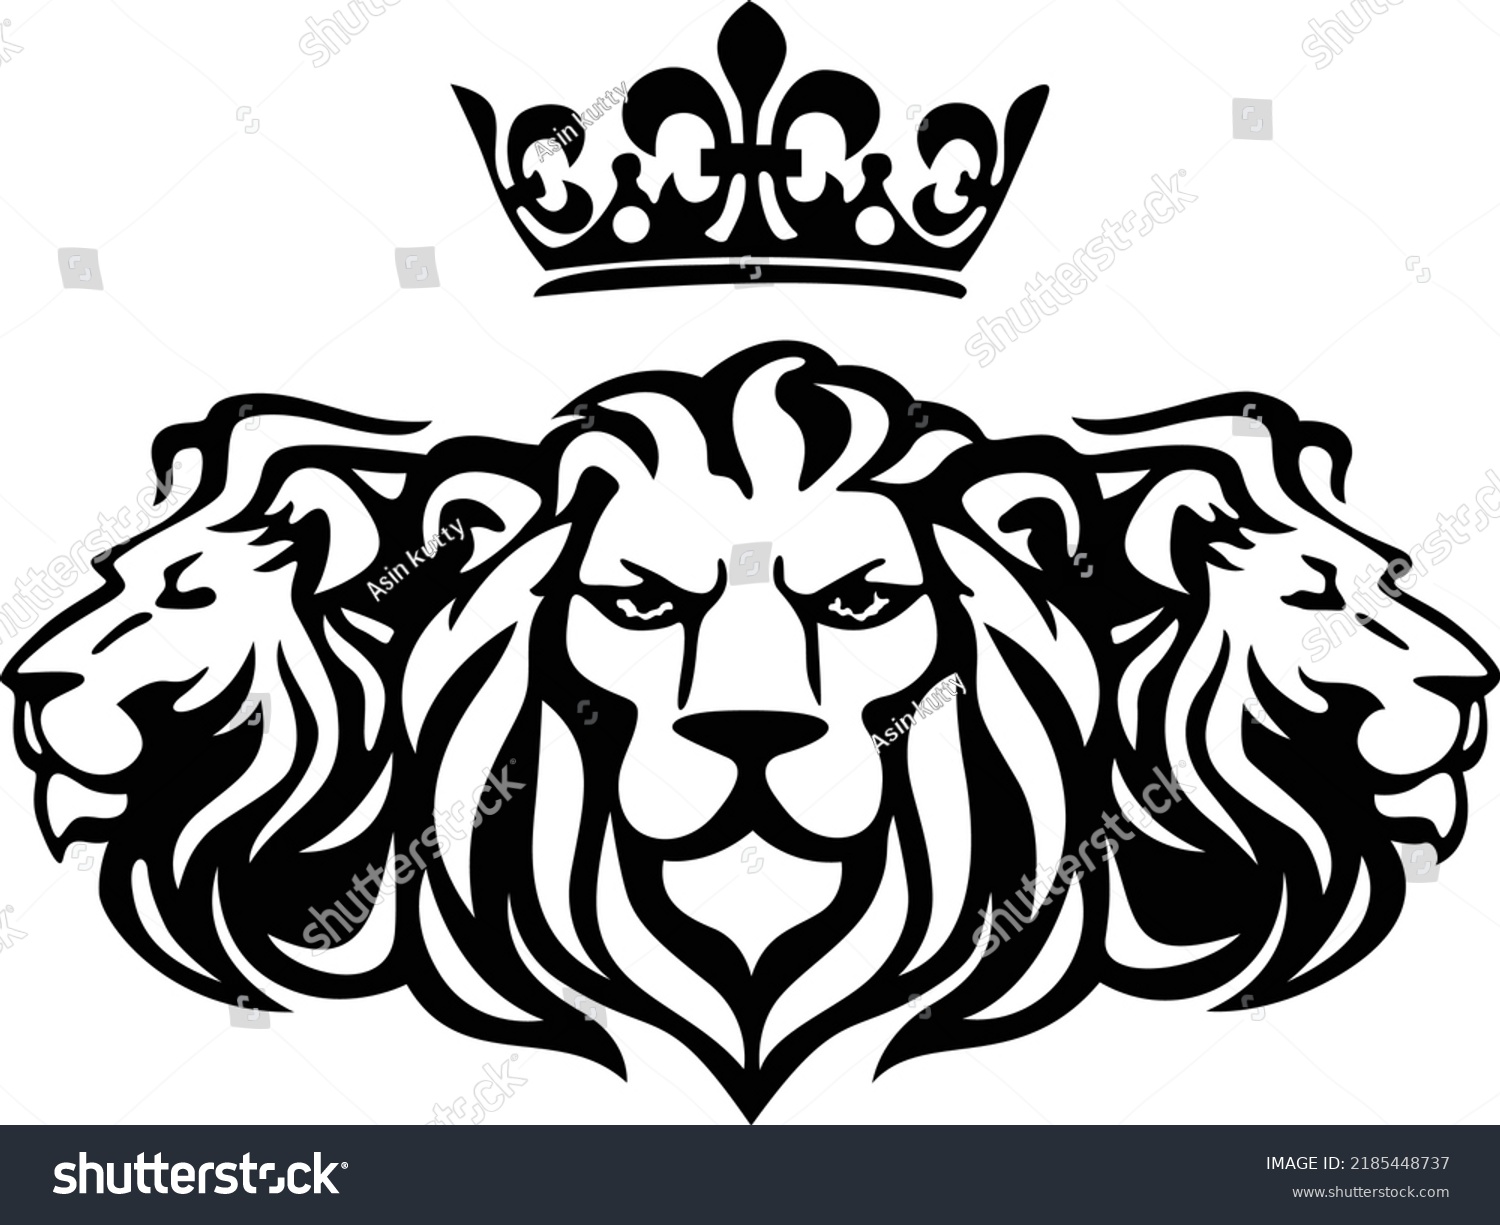 SVG of Three Lions Design laser cut svg  files wall sticker engraving decal silhouette template svg